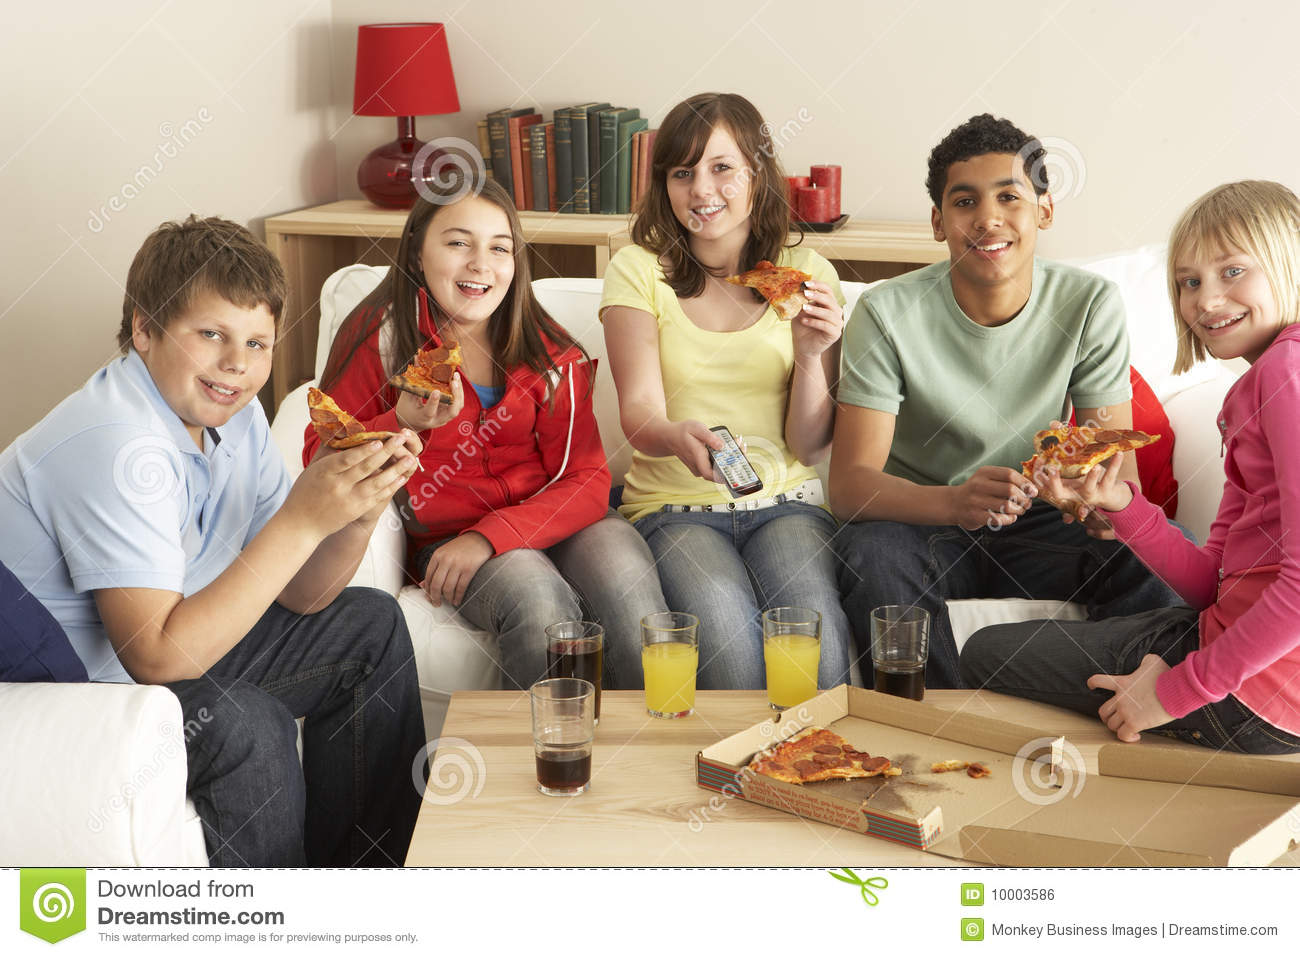 Group Of Children Eating Pizza Watching Tv Royalty Free Stock Image